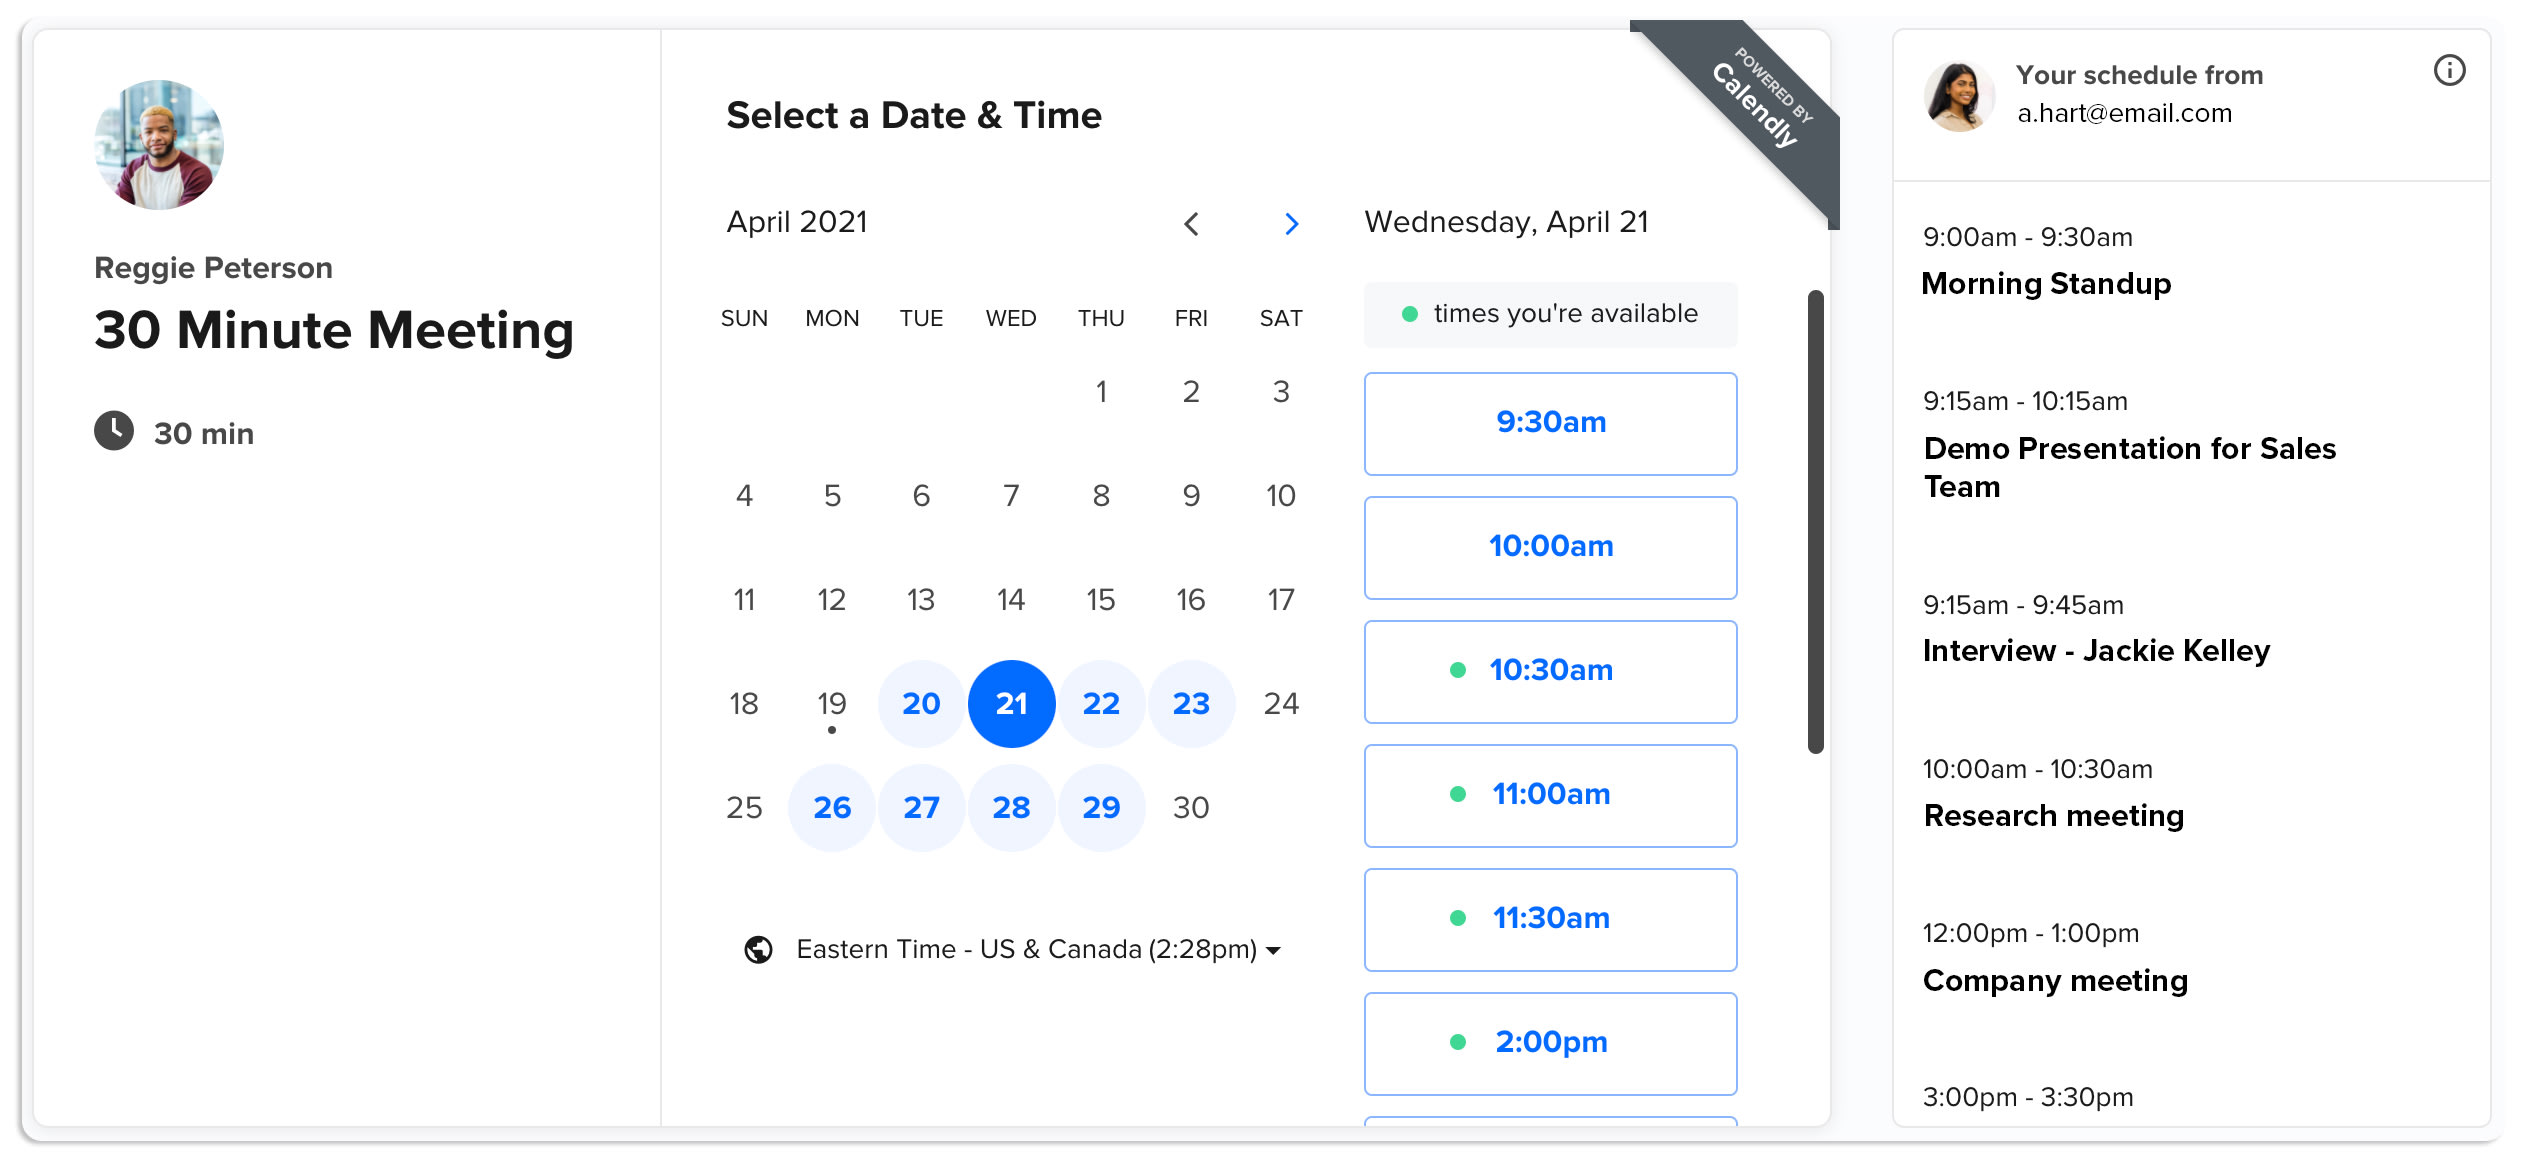 When you’re invited to schedule time with another Calendly user, you can log into the platform to see when you’re both available.